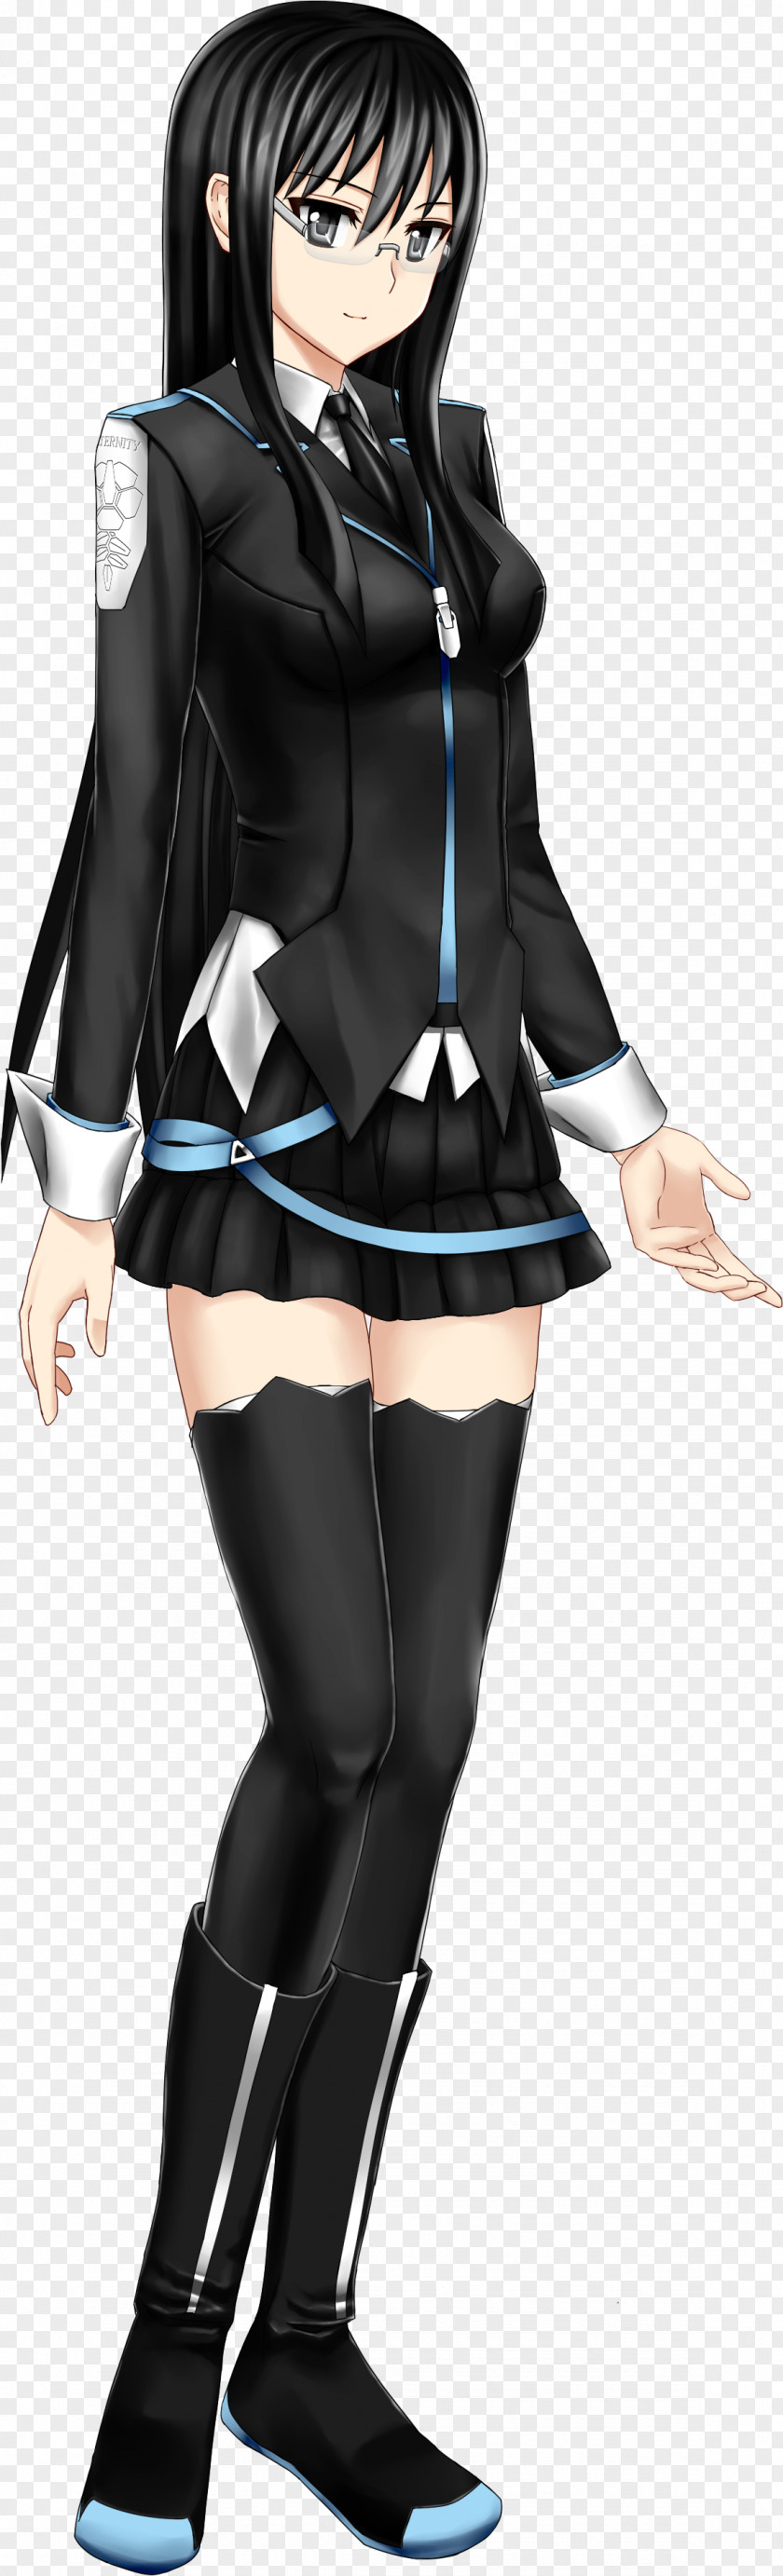 School Girls Analogue: A Hate Story Minecraft Plus Visual Novel Video Game PNG